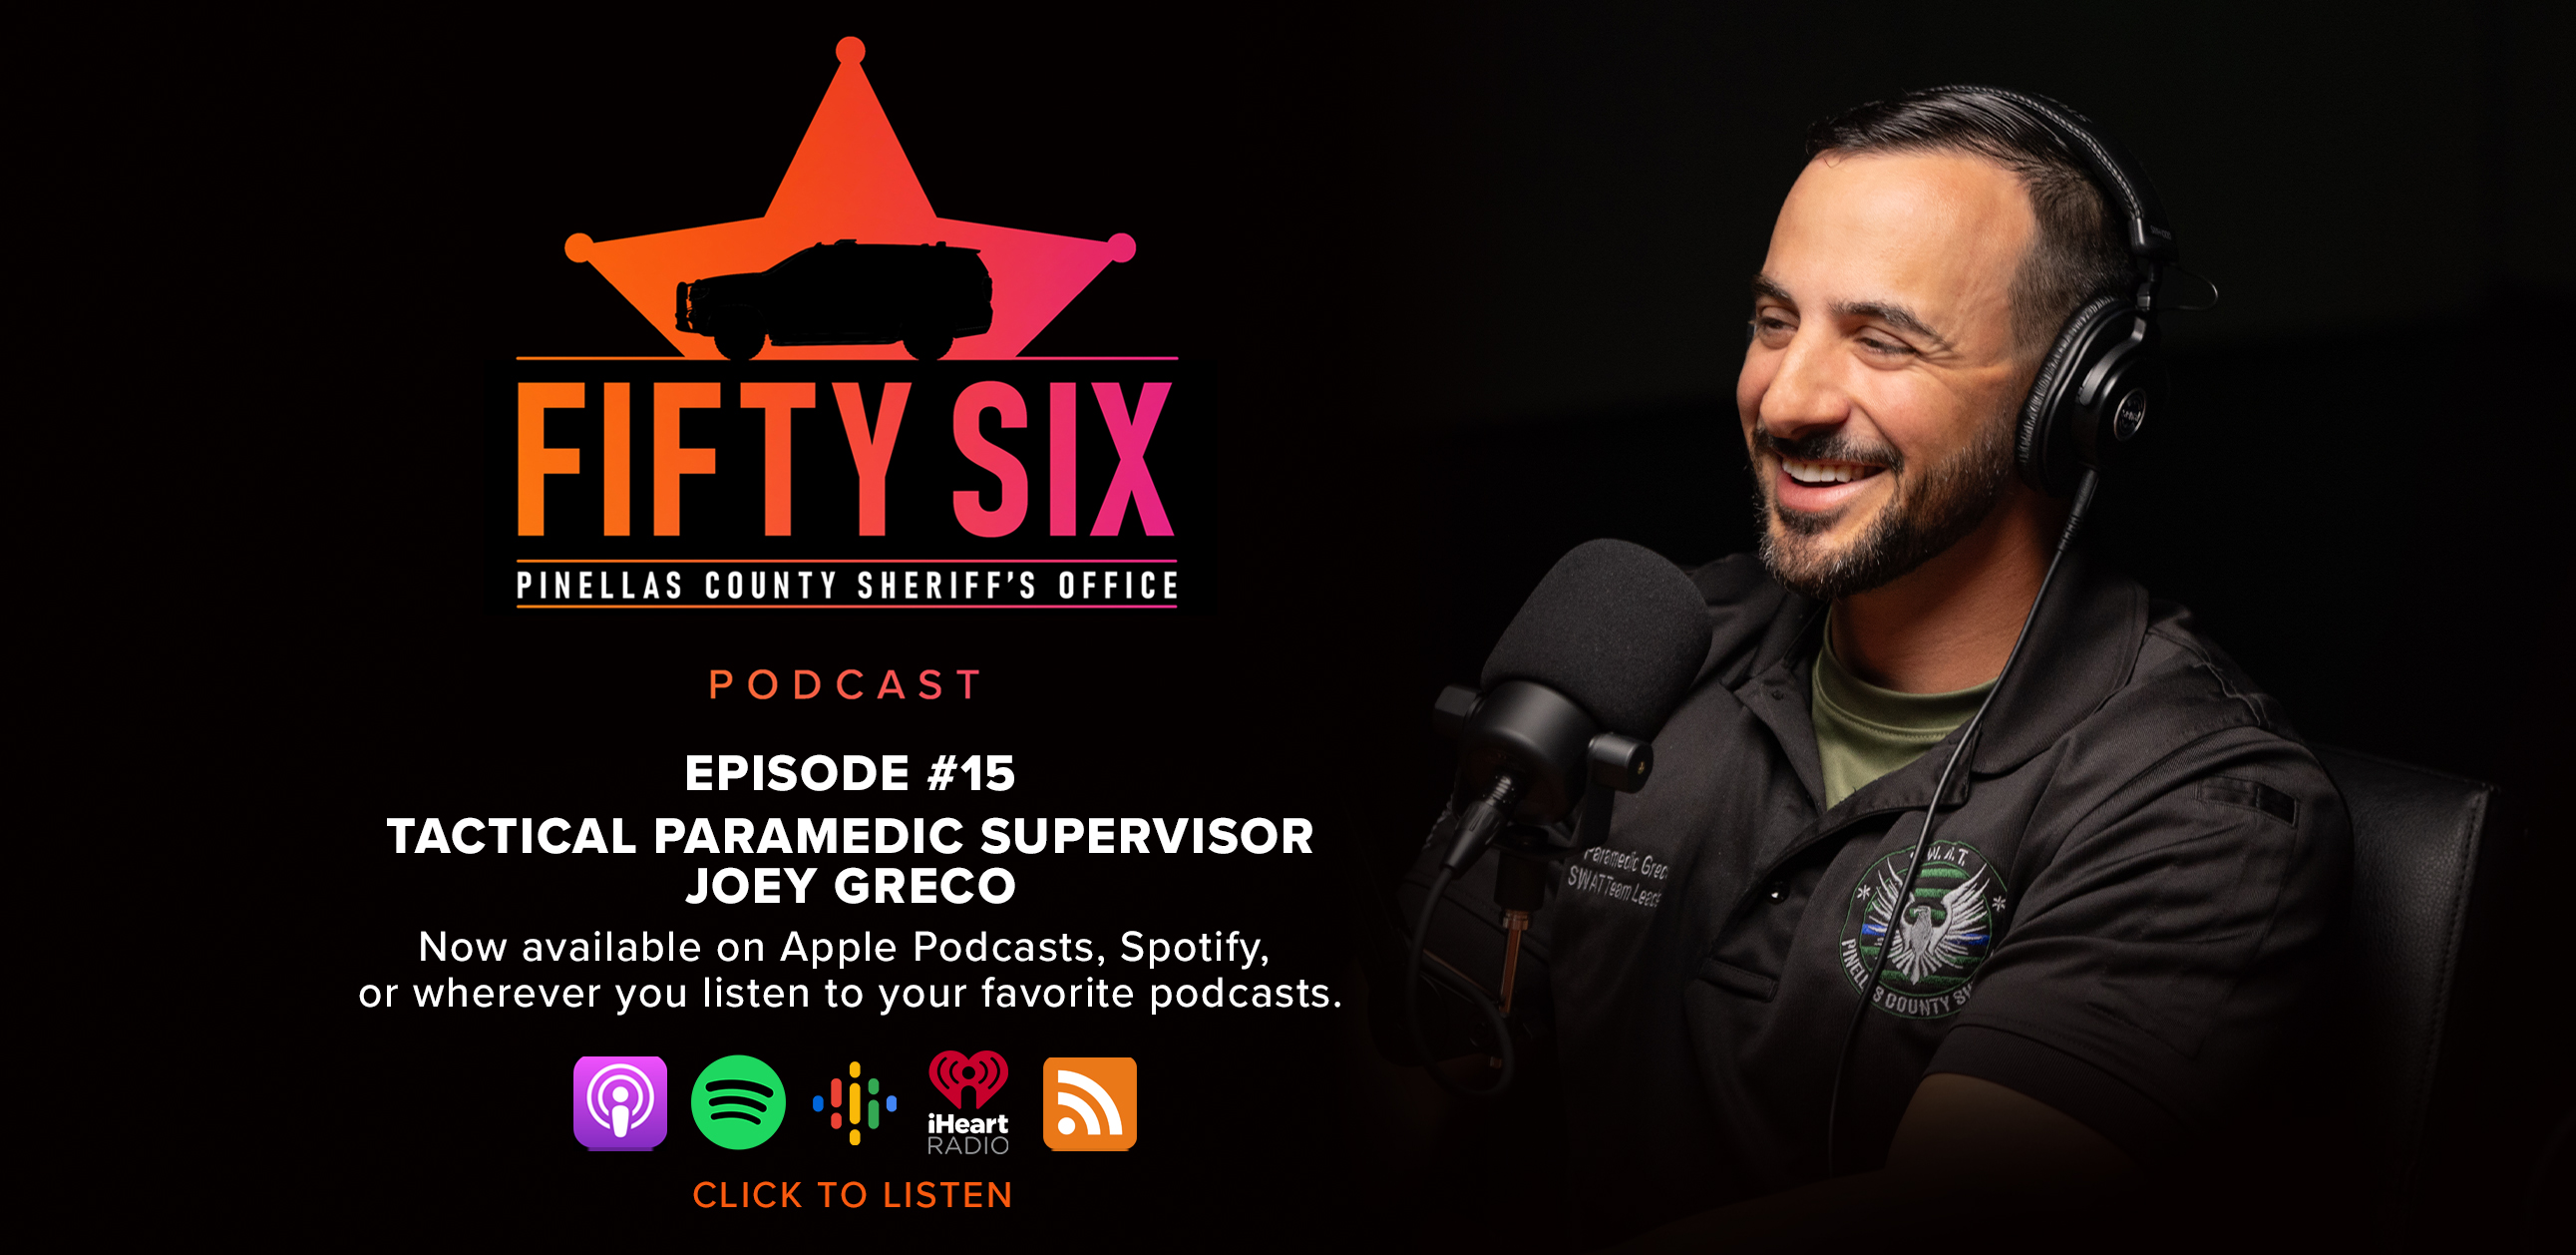 56 Podcast, Episode 15 Tactical Paramedic Supervisor Joey Greco, now available wherever you listen to your favorite podcasts.